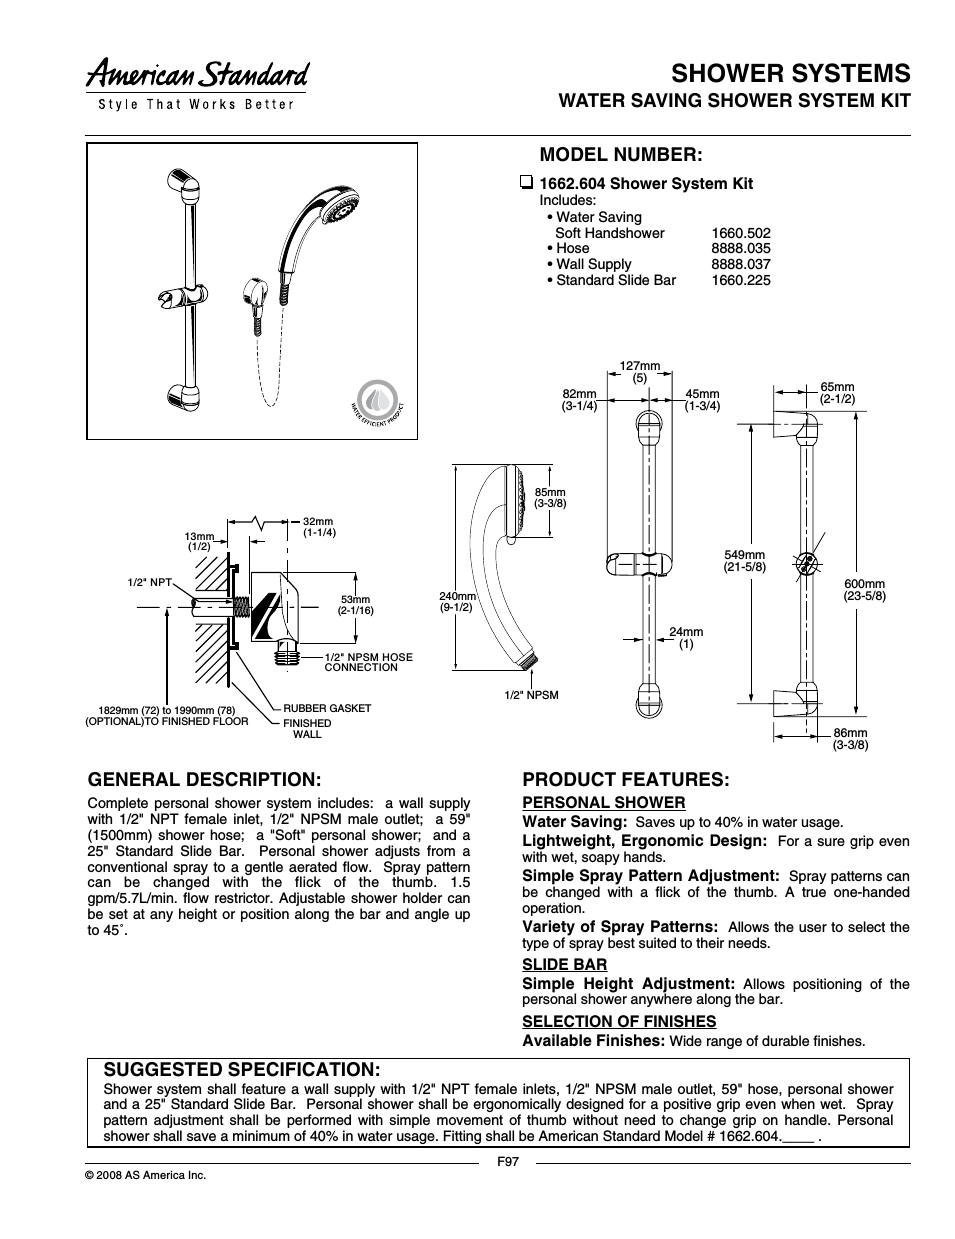 Shower Systems 8888.035